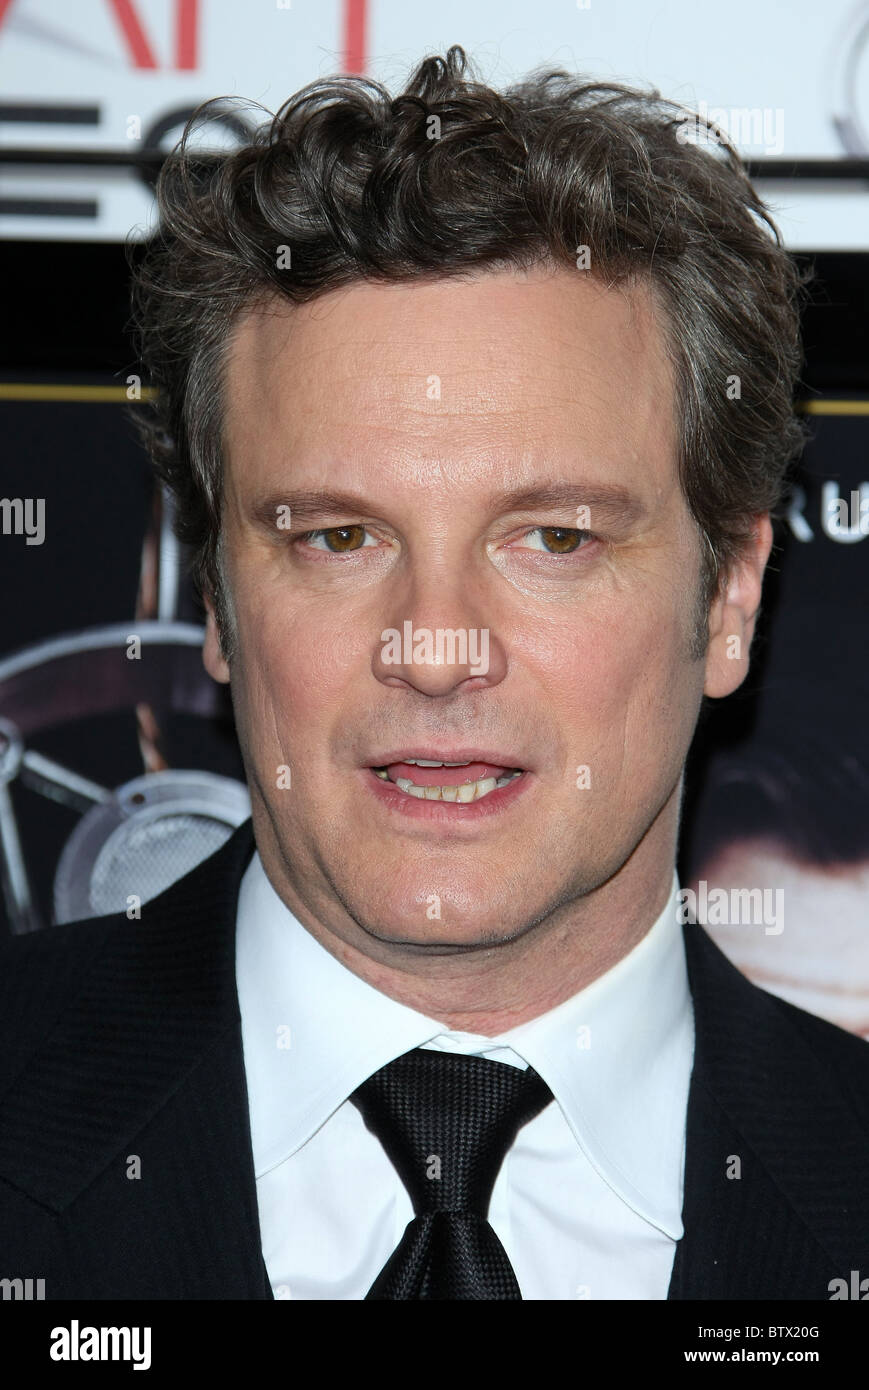 COLIN FIRTH THE KING'S SPEECH ENSEMBLE TRIBUTE. AFI FEST 2010 HOLLYWOOD LOS ANGELES CALIFORNIA USA 05 November 2010 Stock Photo